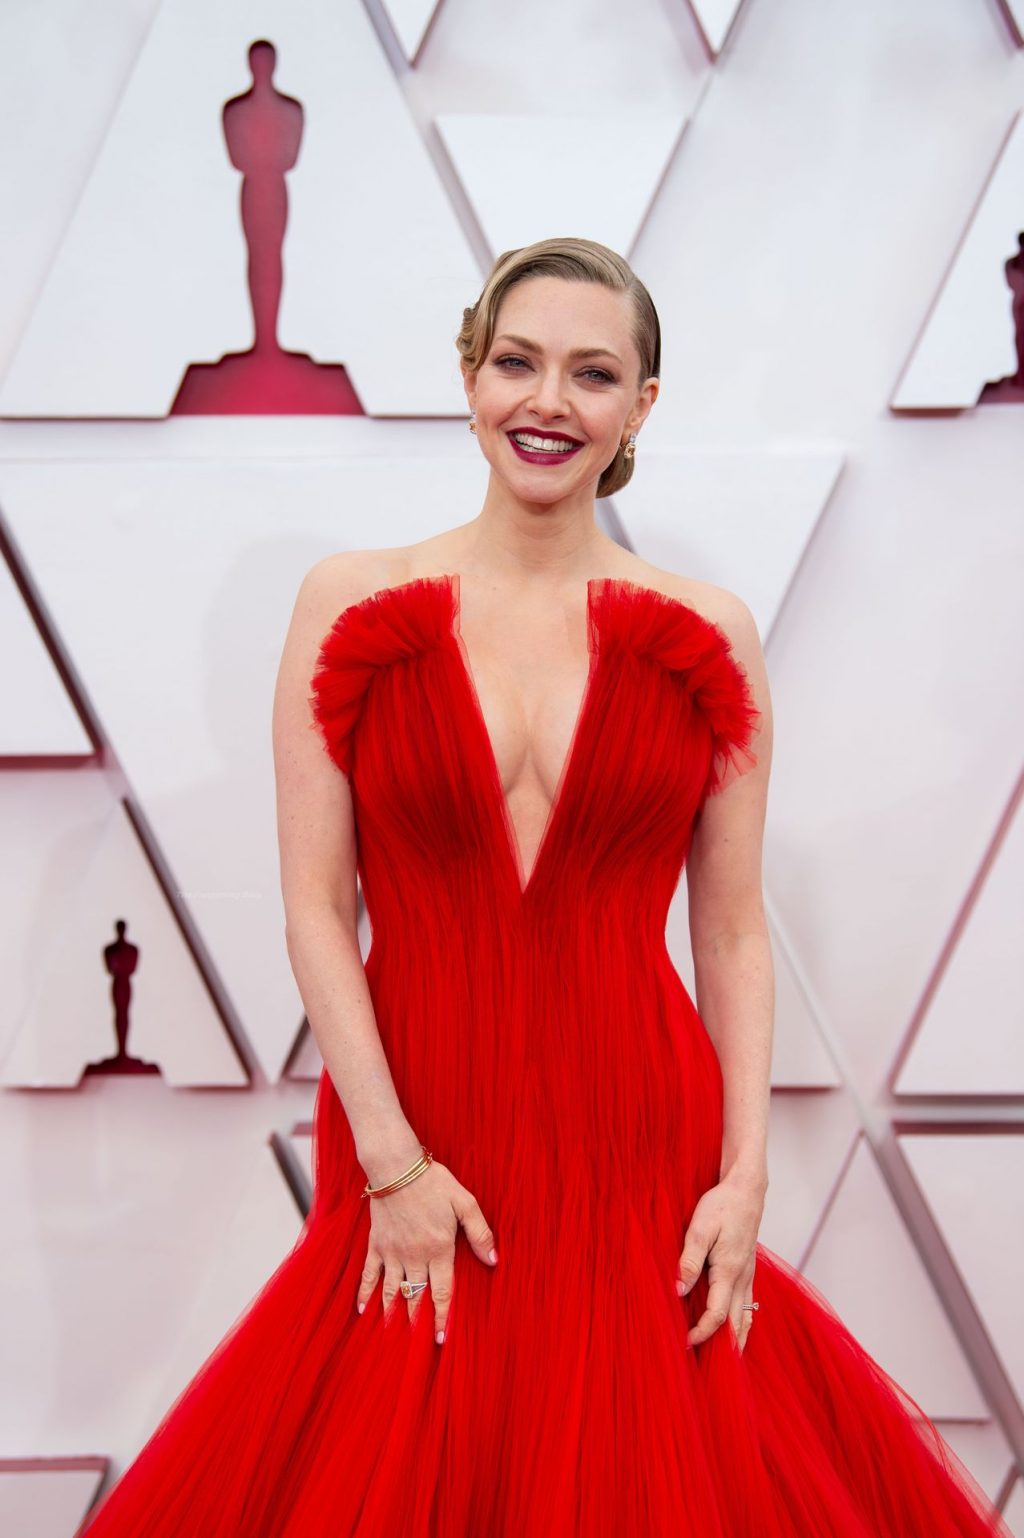 Amanda Seyfried Flaunts Her Tits on the Red Carpet of The 93rd Academy Awards (52 Photos)